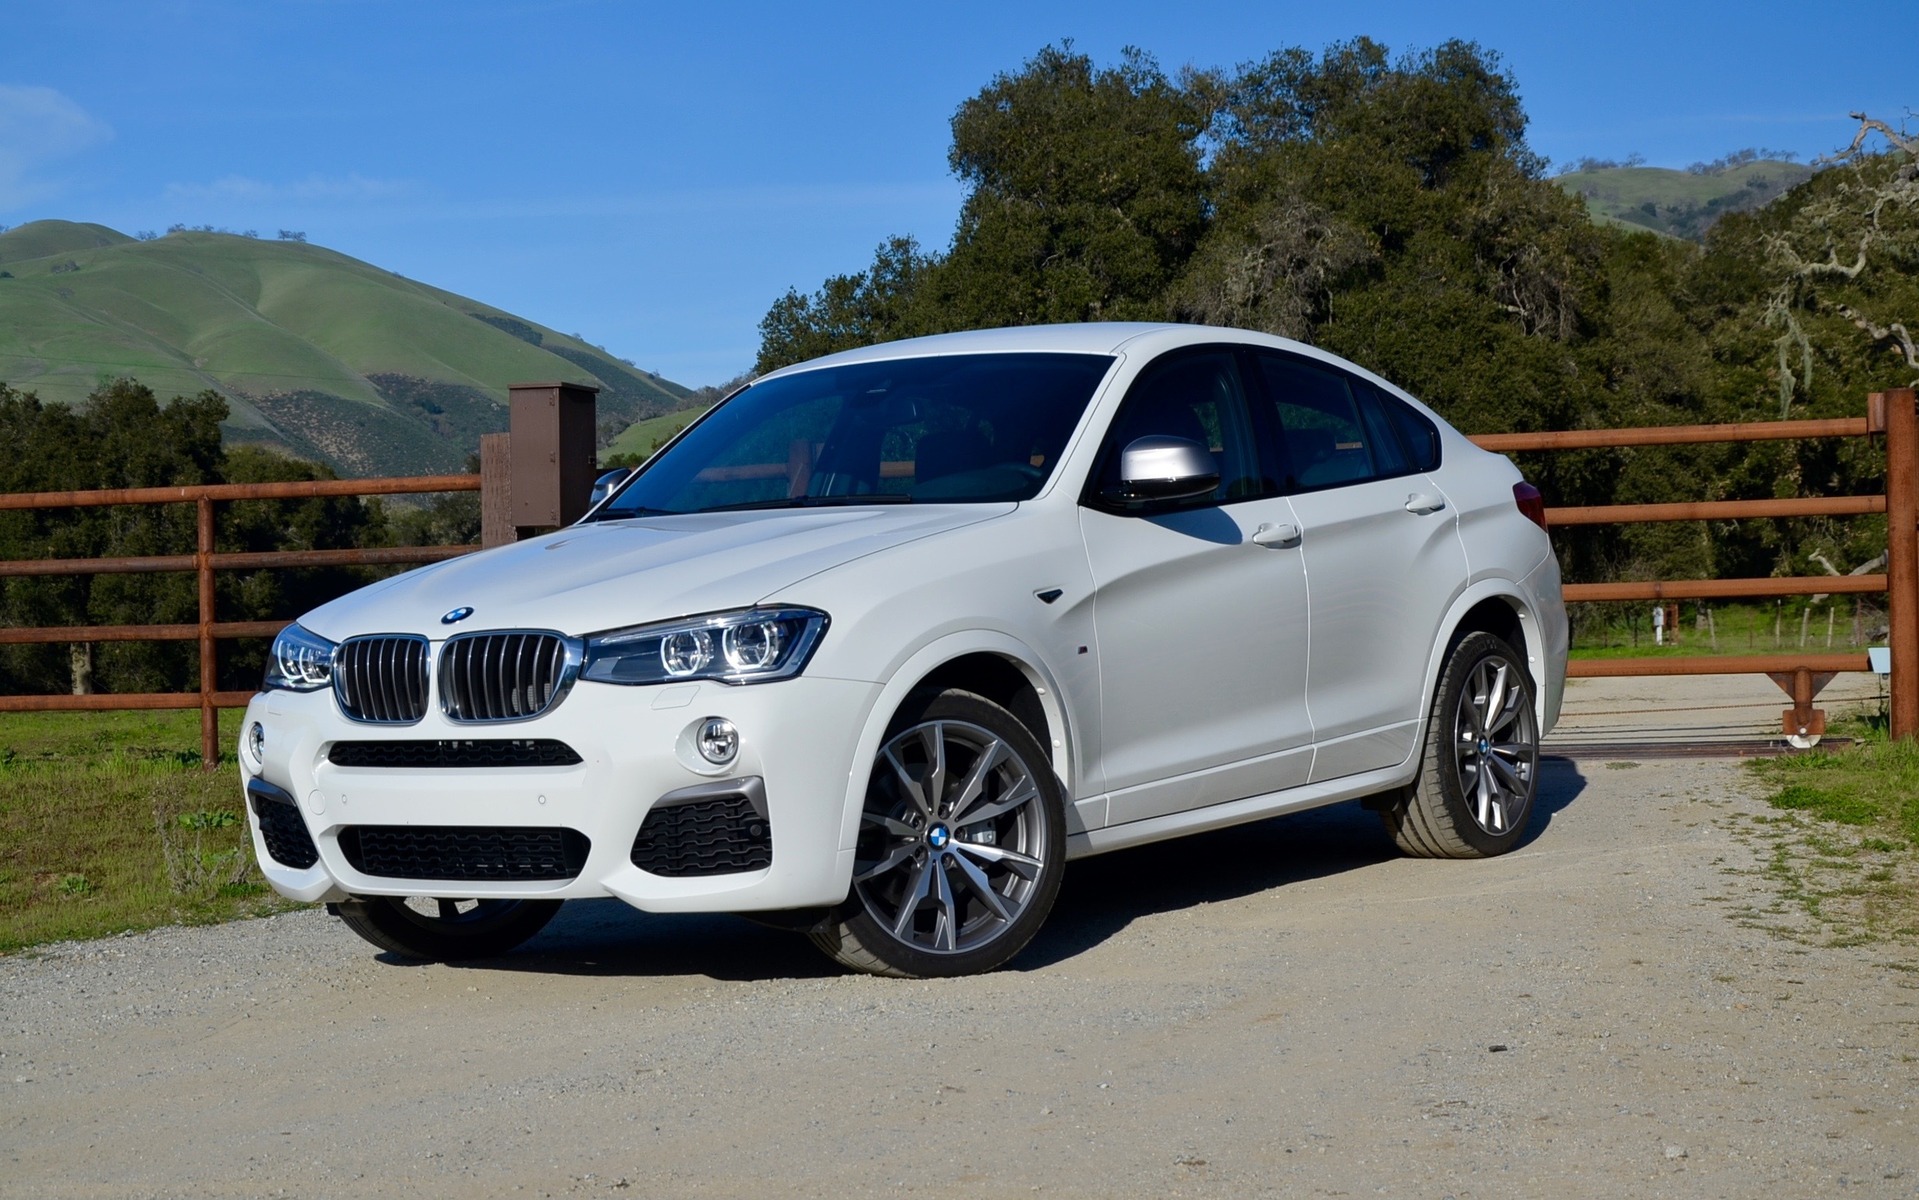 A much sportier look than a conventional X4.